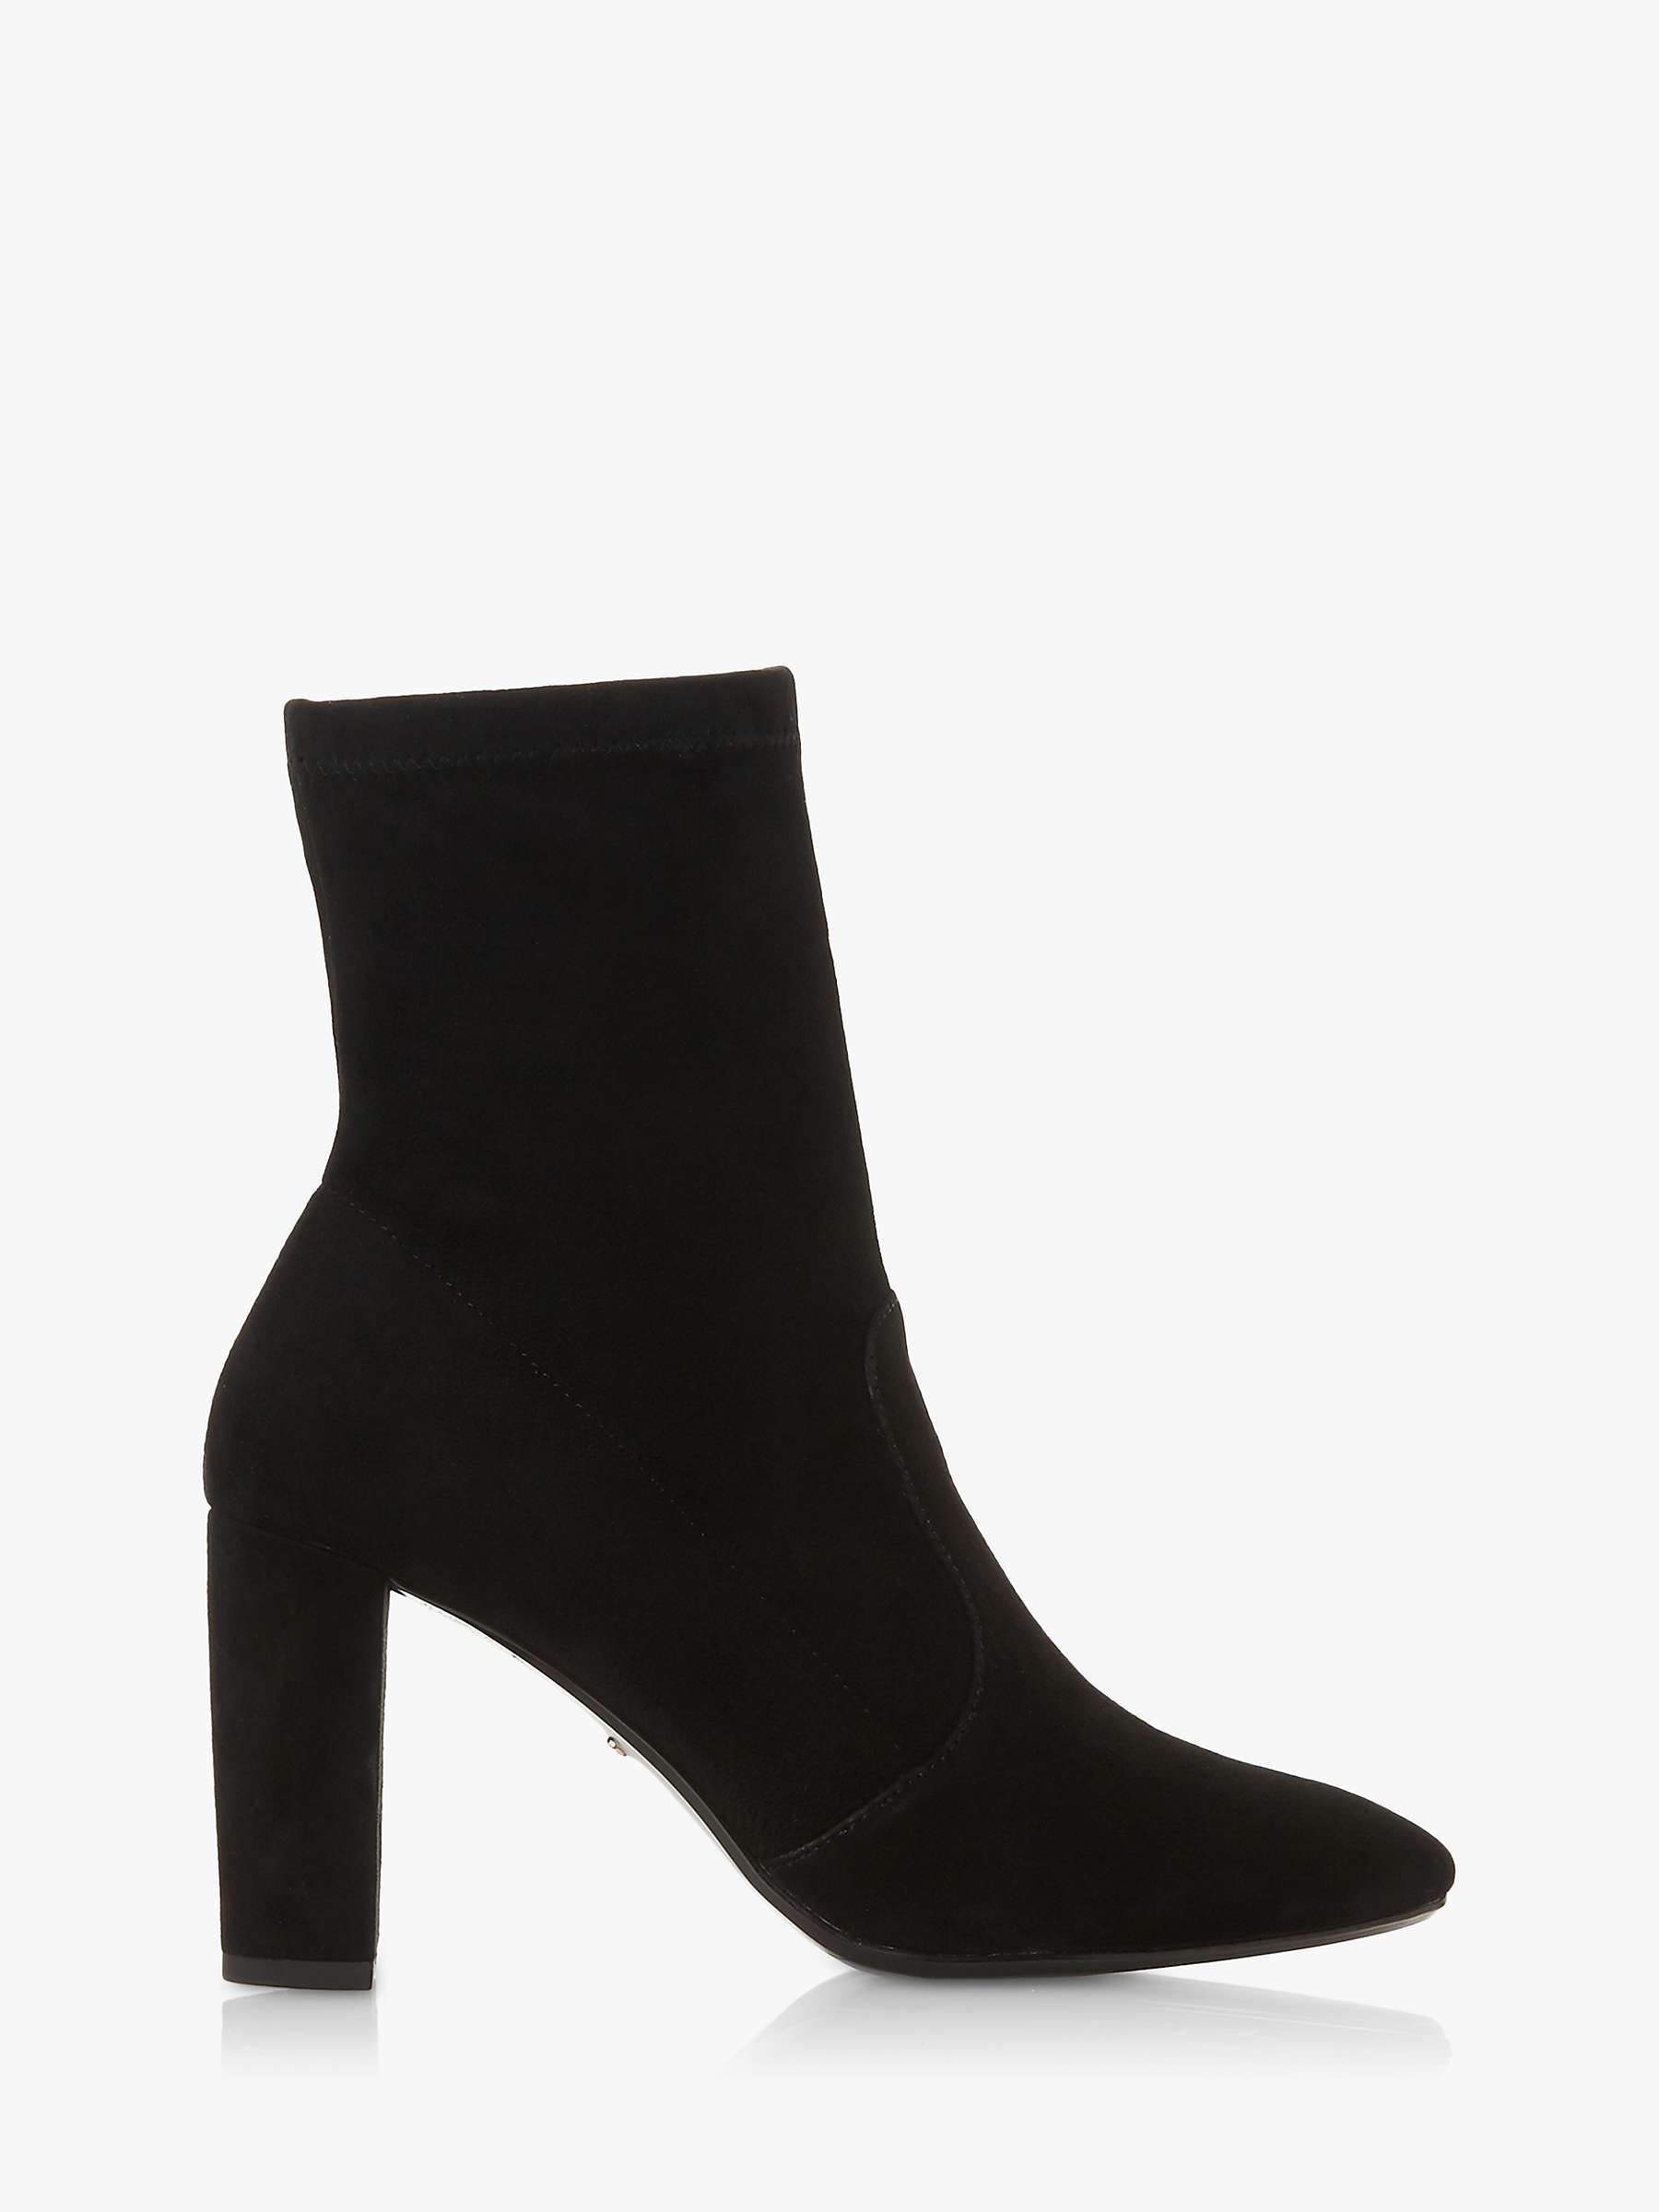 Buy Dune Optical Suede Ankle Boots, Black Online at johnlewis.com